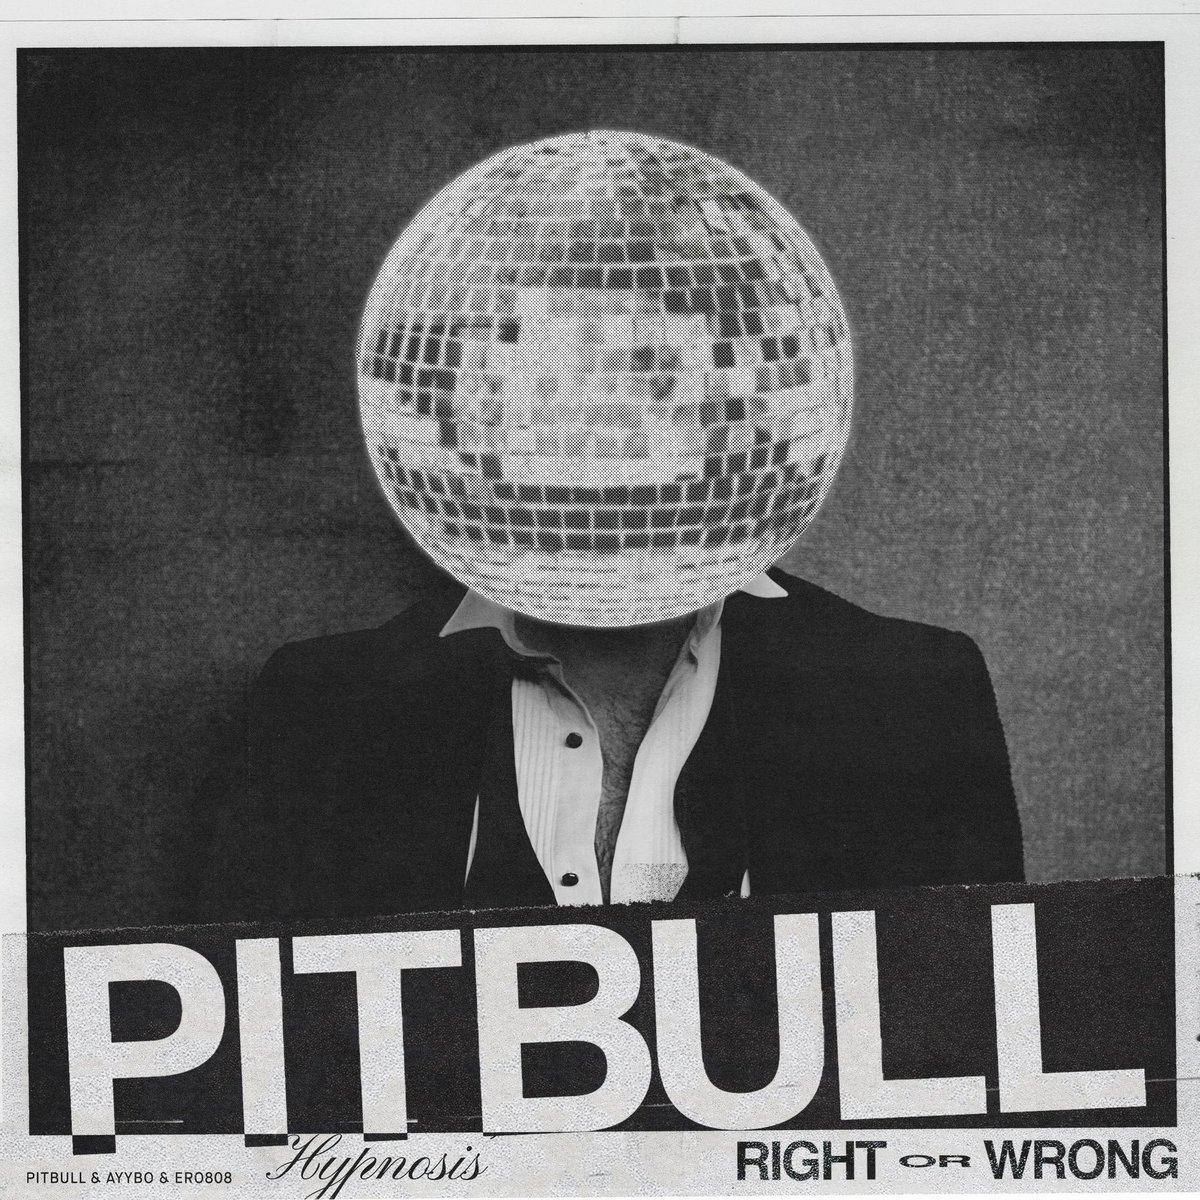 #NewMusicFriday: @pitbull has teamed up with @AYYBOmusic and @ero_808 on their new record, 'Right or Wrong', going LIVE this Friday, January 20th! 🔥🎶 PRE-SAVE the brand new single on all platforms via the following link: mr305.co/hypnosis